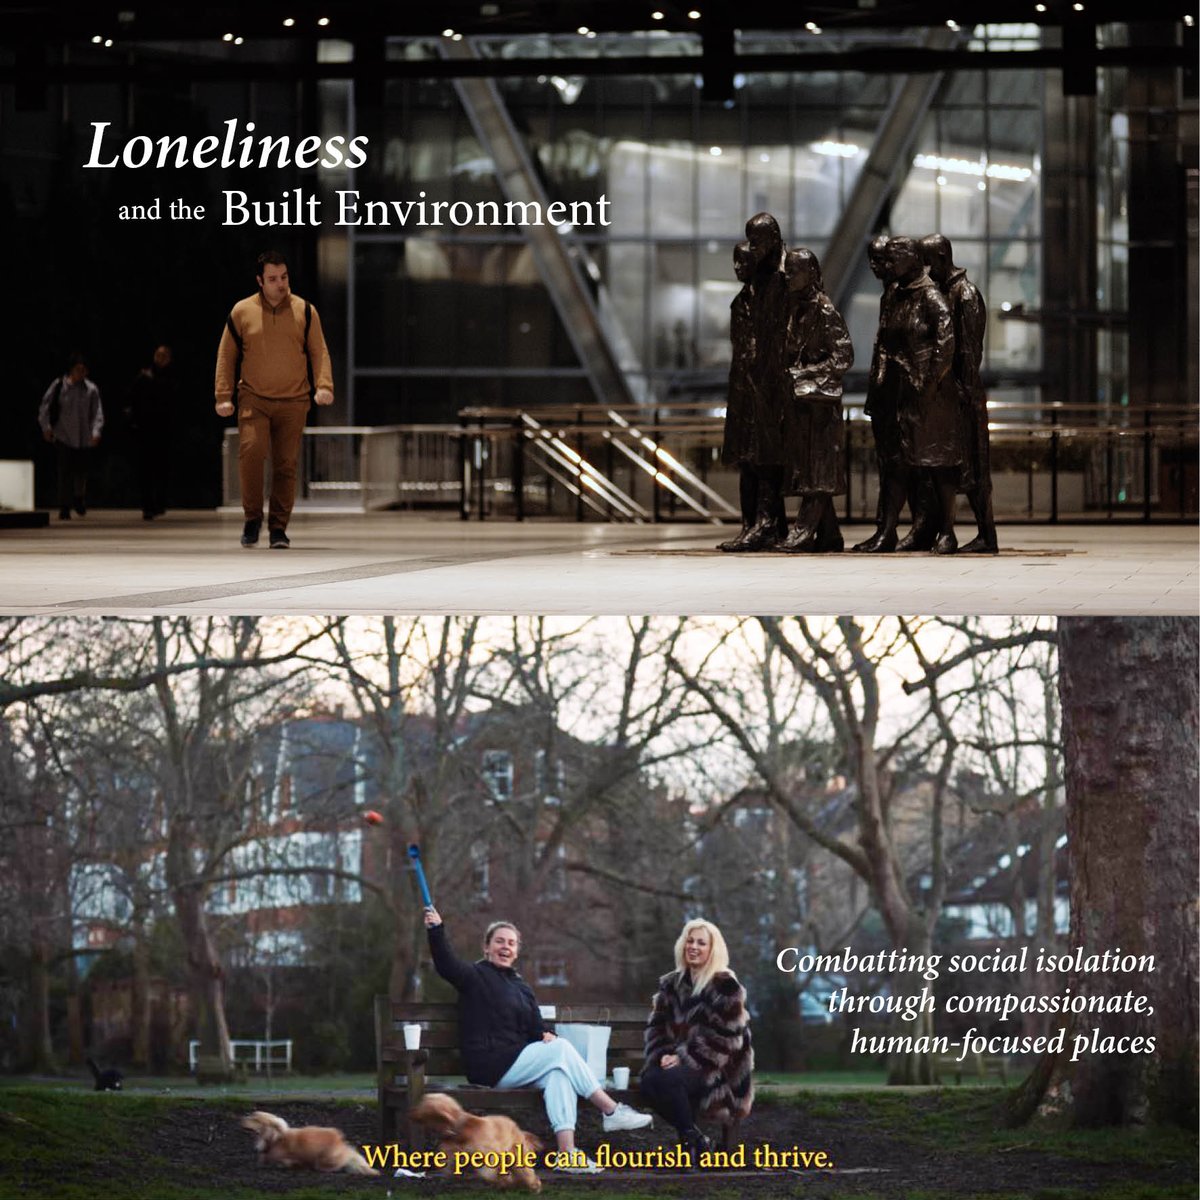 #Loneliness & the Built Environment is a new short film on the urgent need to shape places for individual and social wellbeing It calls for a shift to rethink cities to create more compassionate, connective, human-focused places 🎬 Watch it here: bit.ly/3VljKkU